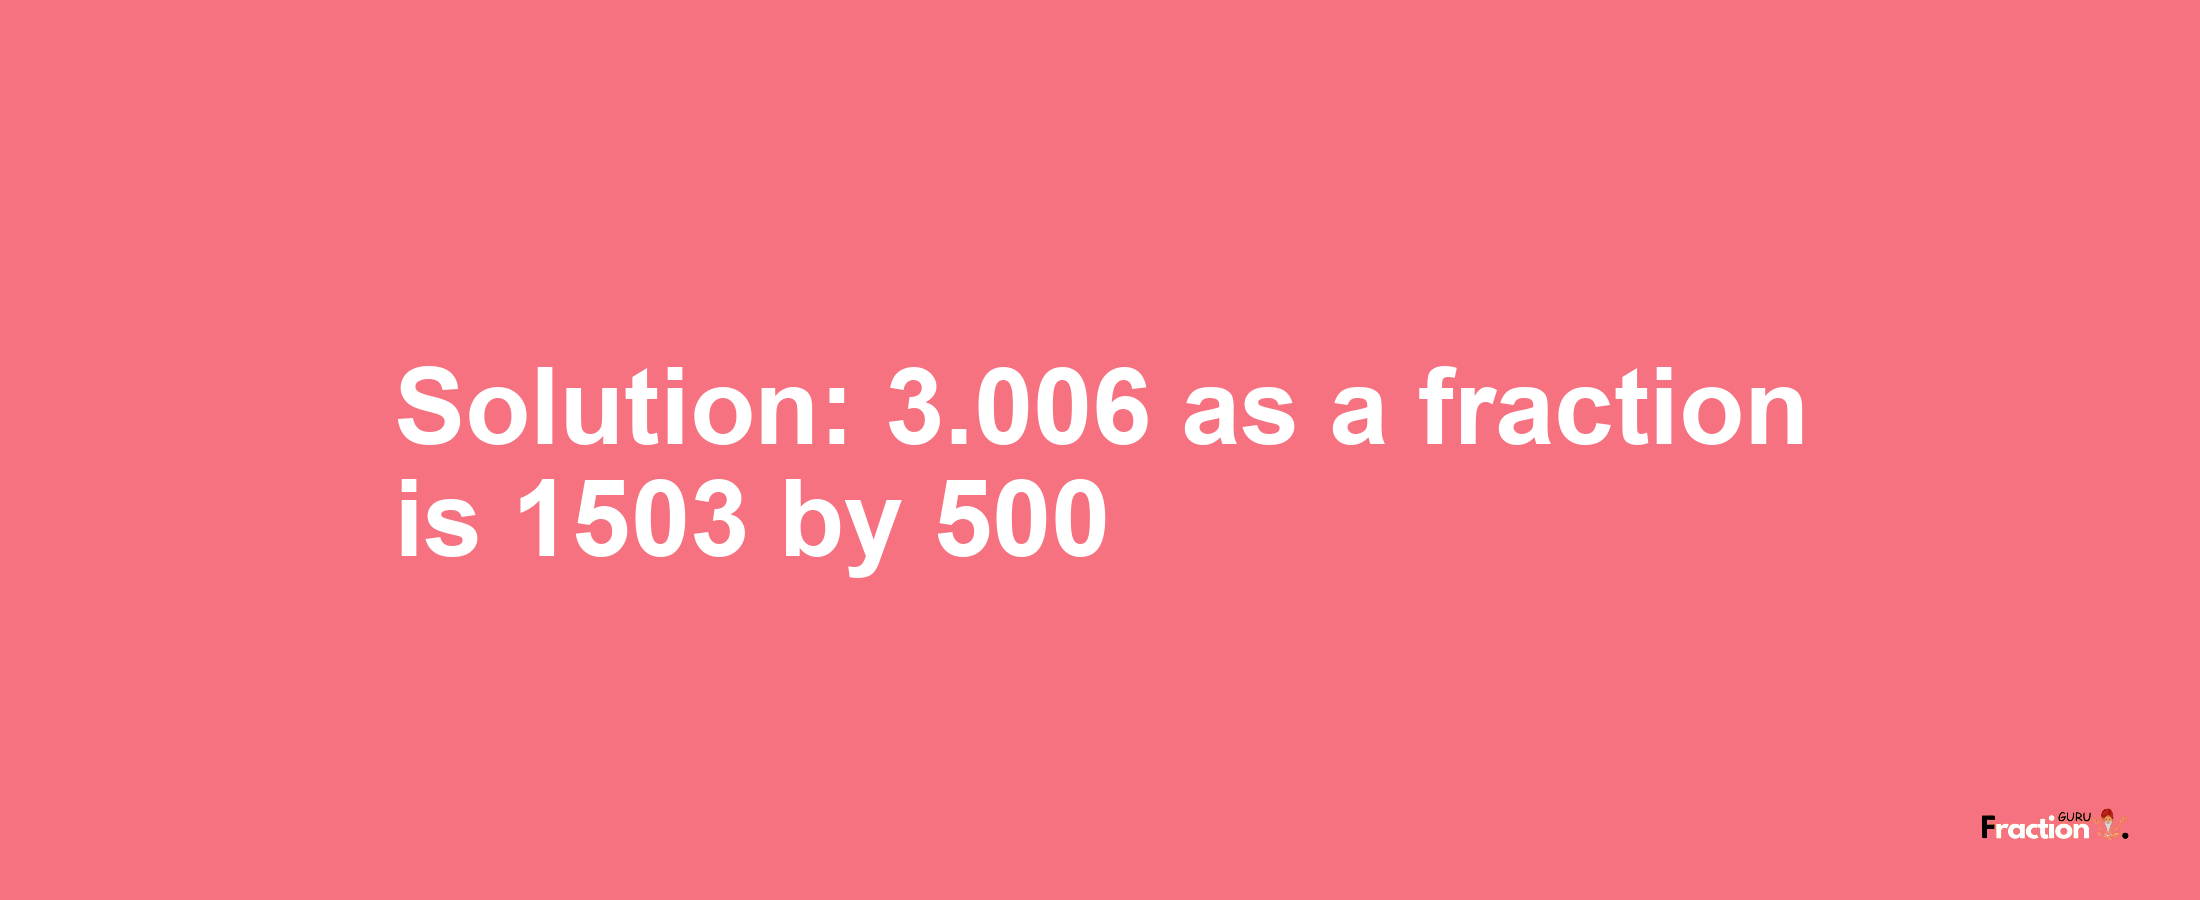 Solution:3.006 as a fraction is 1503/500